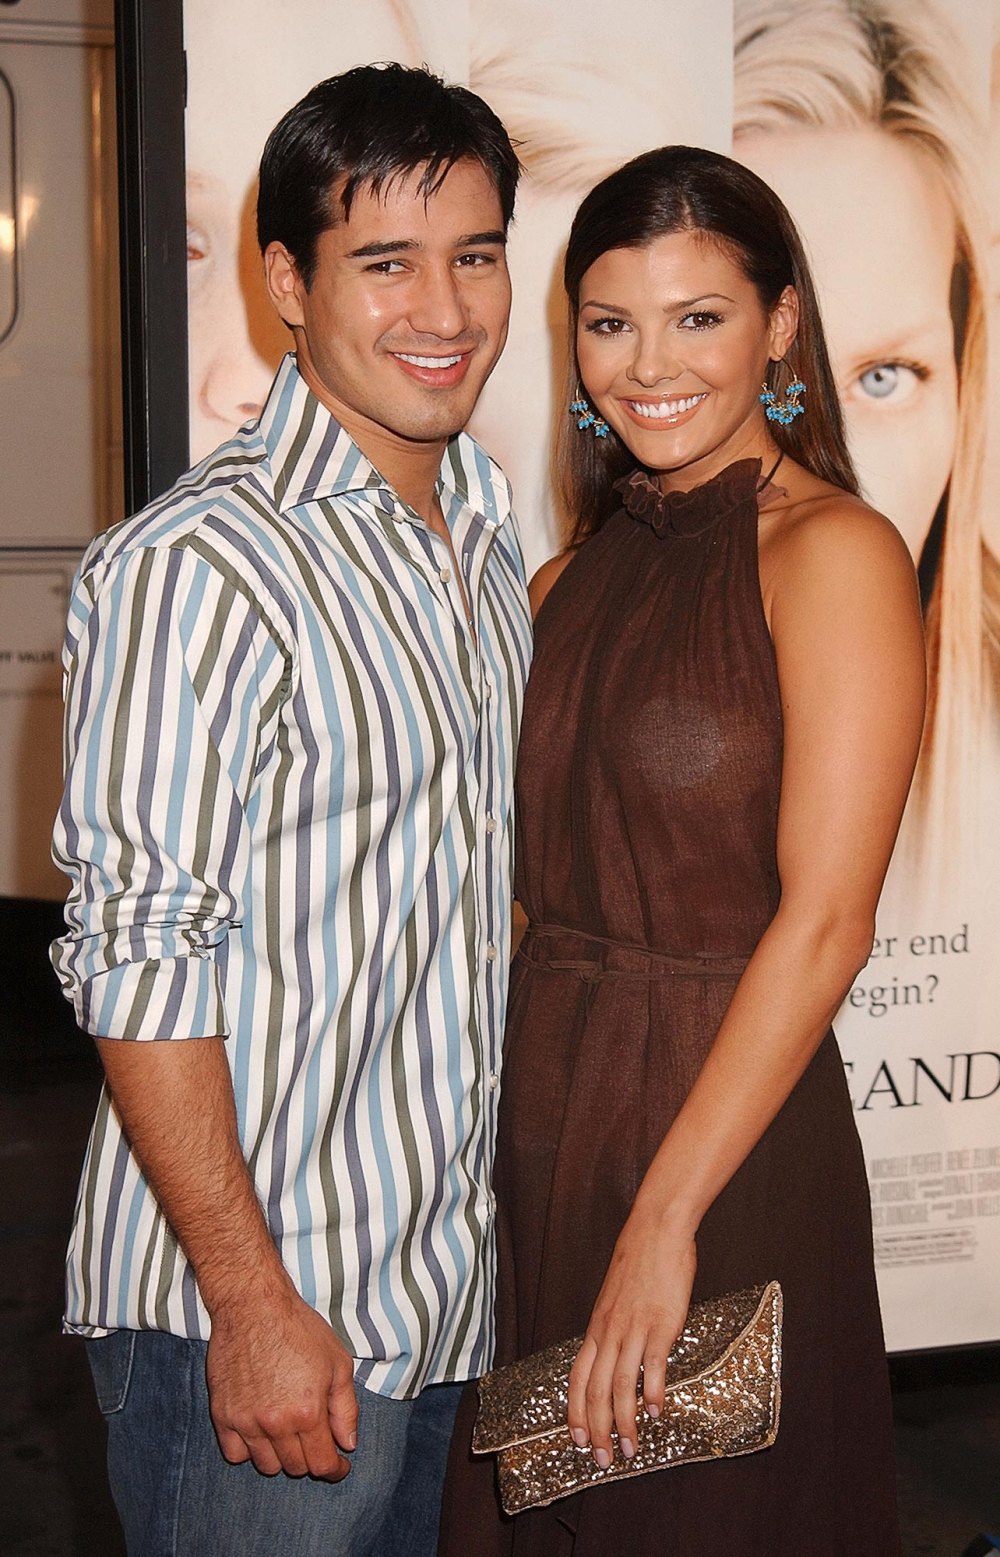 Gerry Turner and Theresa Nist are not alone 11 celebrity couples who were married for less than 100 days 661 Mario Lopez and Ali Landry